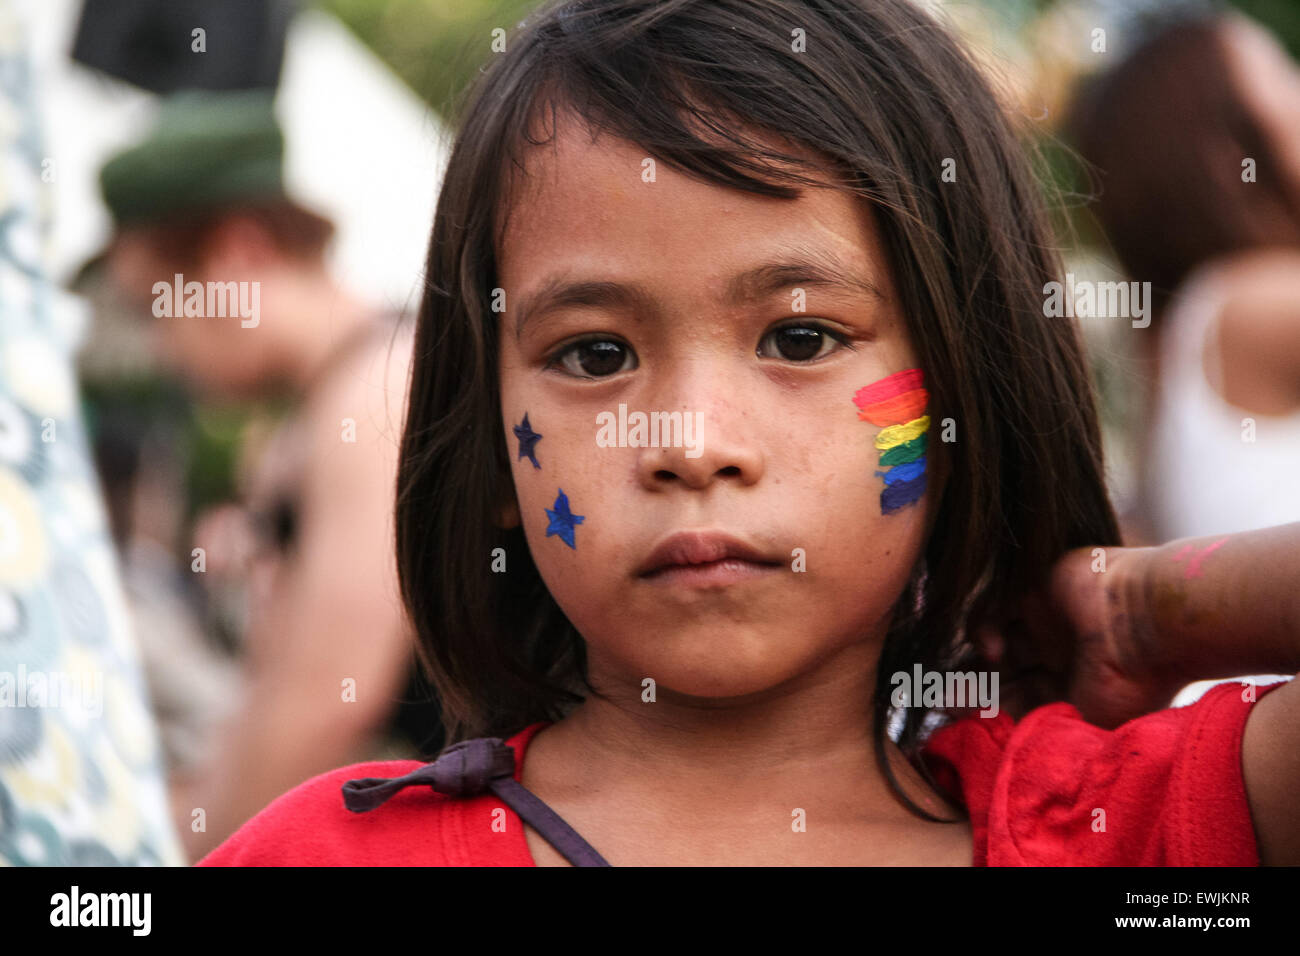 Manila, Philippines. 27th June, 2015. A young kid, with a rainbow flag face paint, poses for the camera at the Rizal Park in Manila. Thousands of LBGTQ members marched along Manila's main thoroughfare as they celebrate Manila's 21st Gay Pride Parade. Credit:  J Gerard Seguia/Pacific Press/Alamy Live News Stock Photo